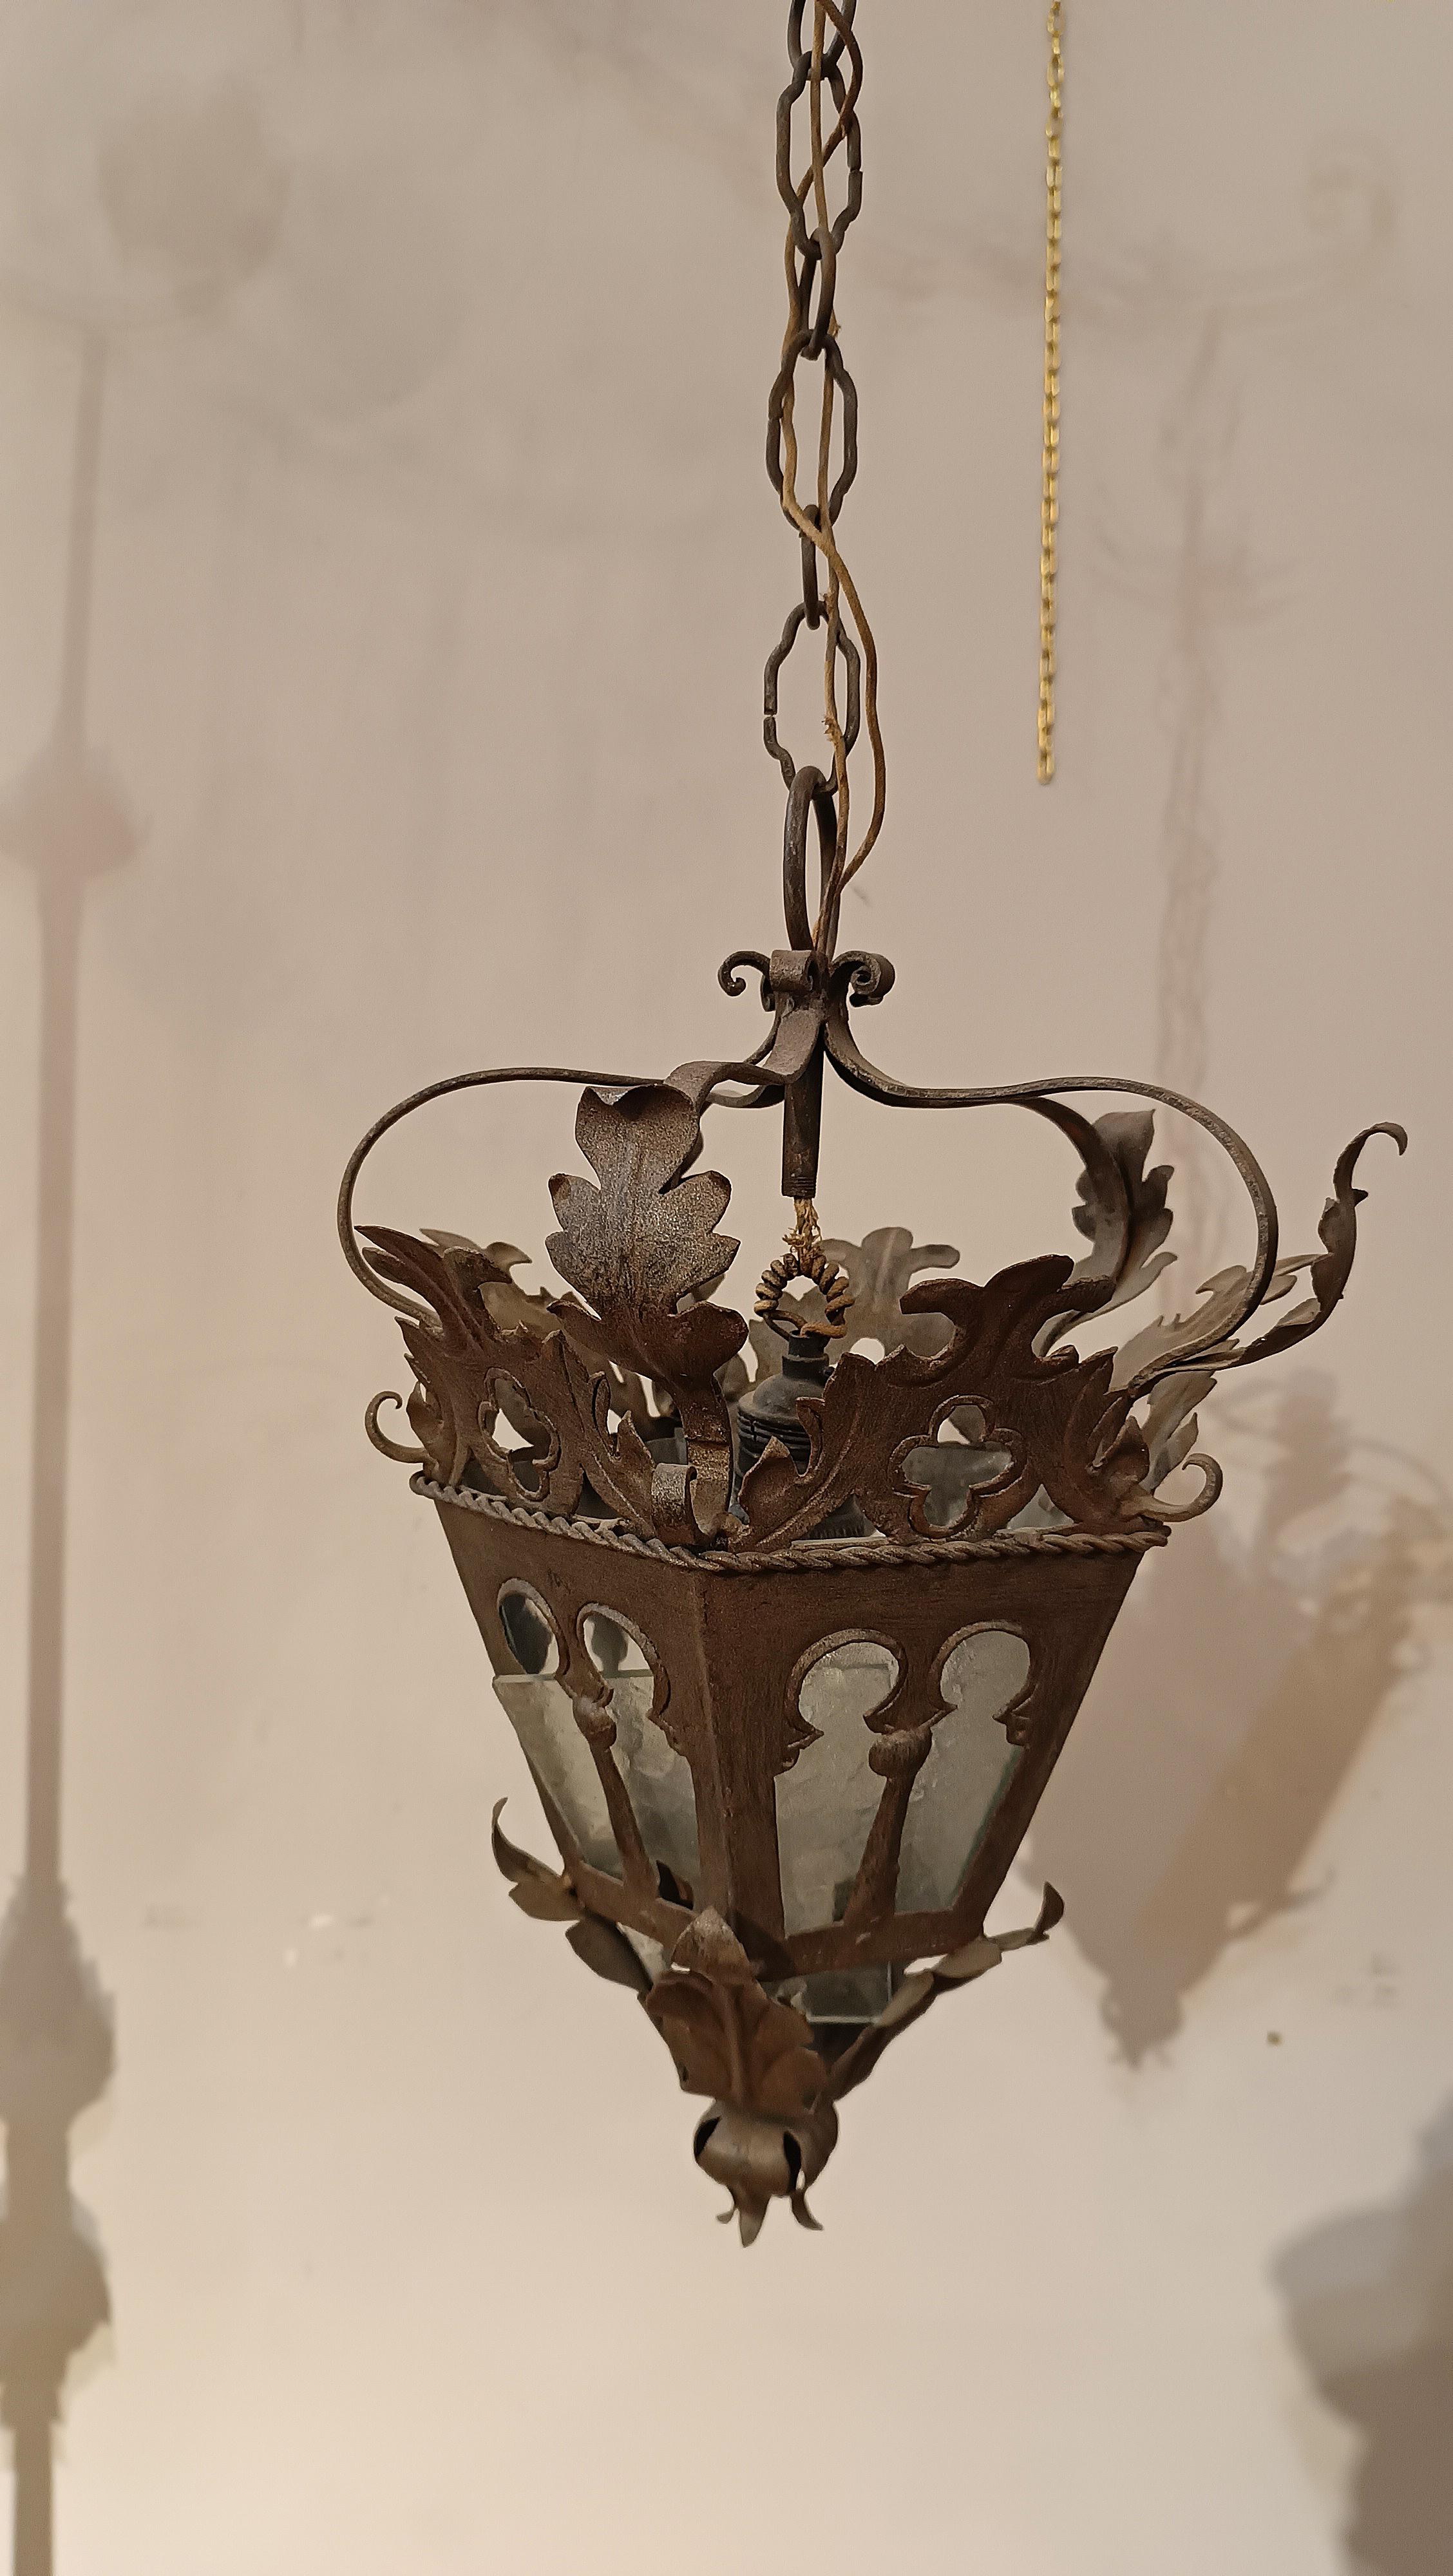 END OF THE 19th CENTURY IRON LANTERN HOLDER For Sale 6